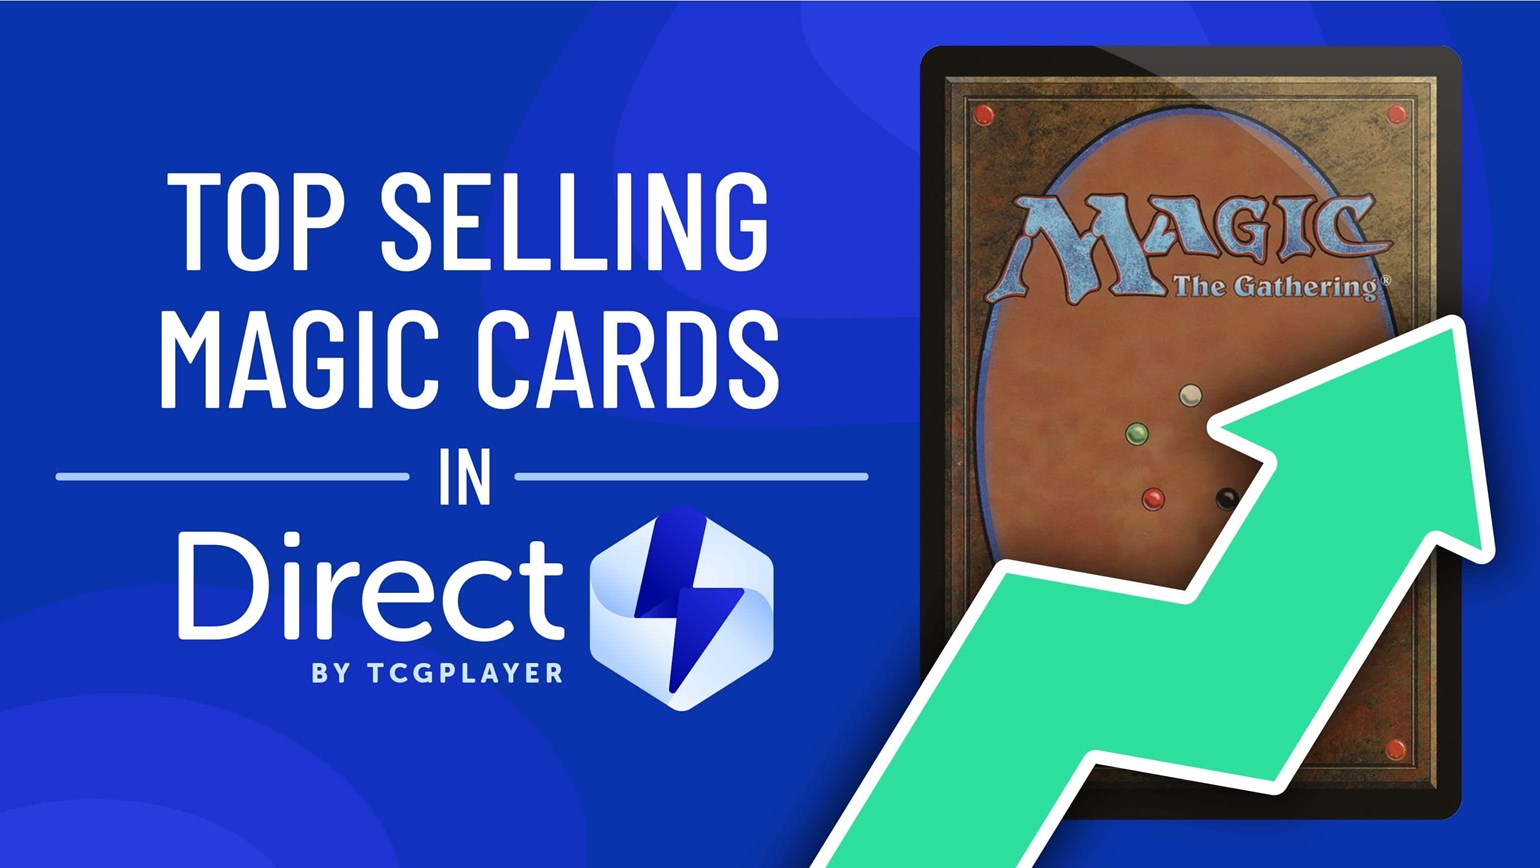 December Top Selling Magic: The Gathering Cards in Direct by TCGplayer